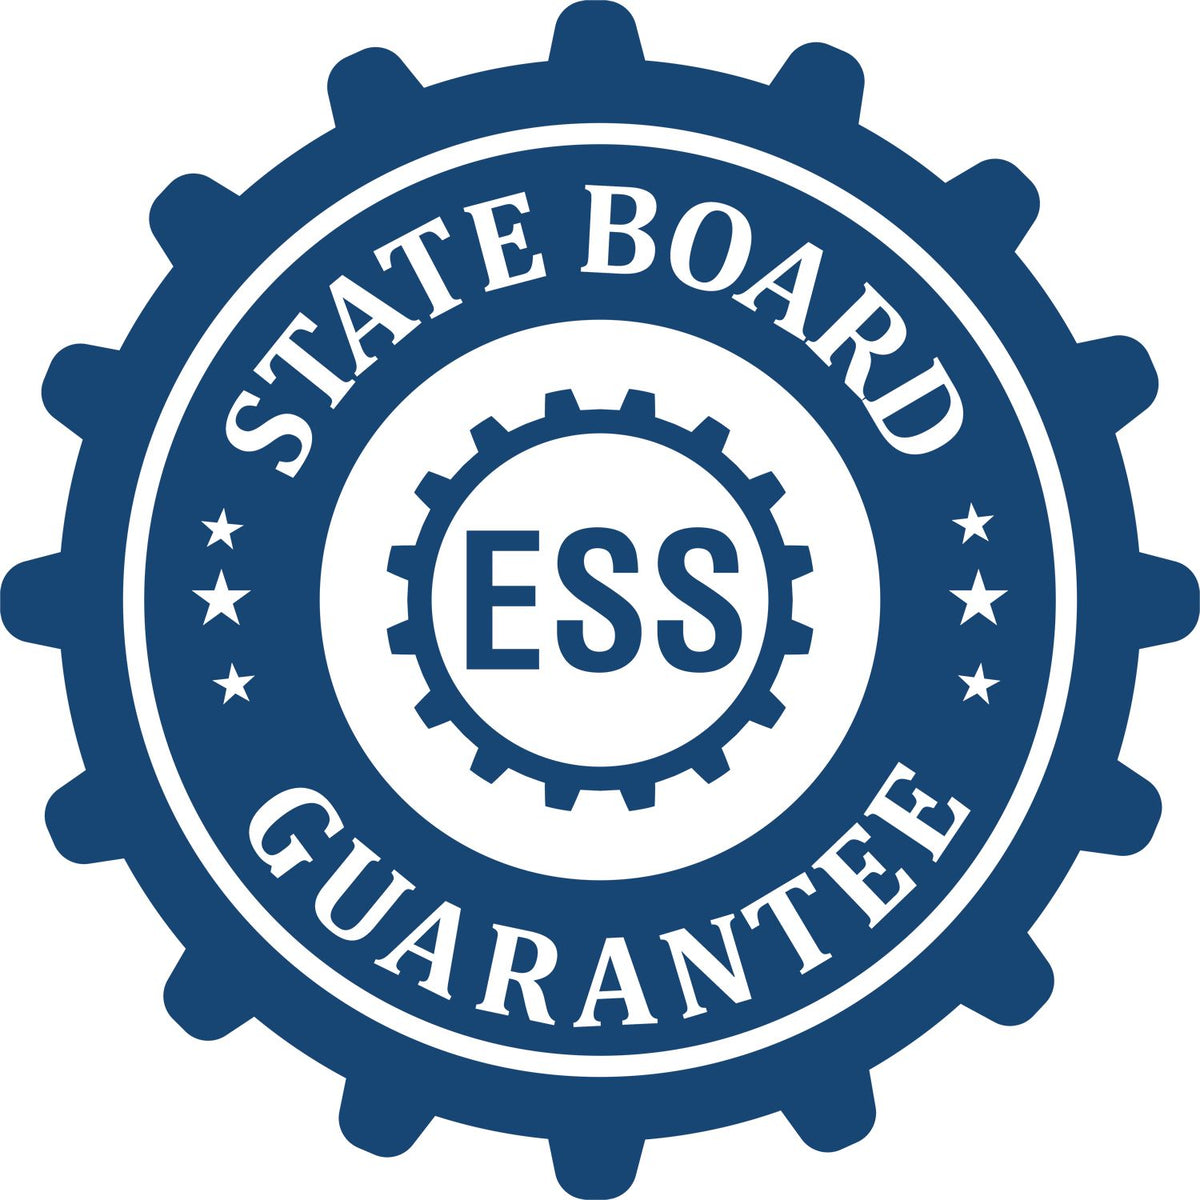 An emblem in a gear shape illustrating a state board guarantee for the Hybrid Idaho Architect Seal